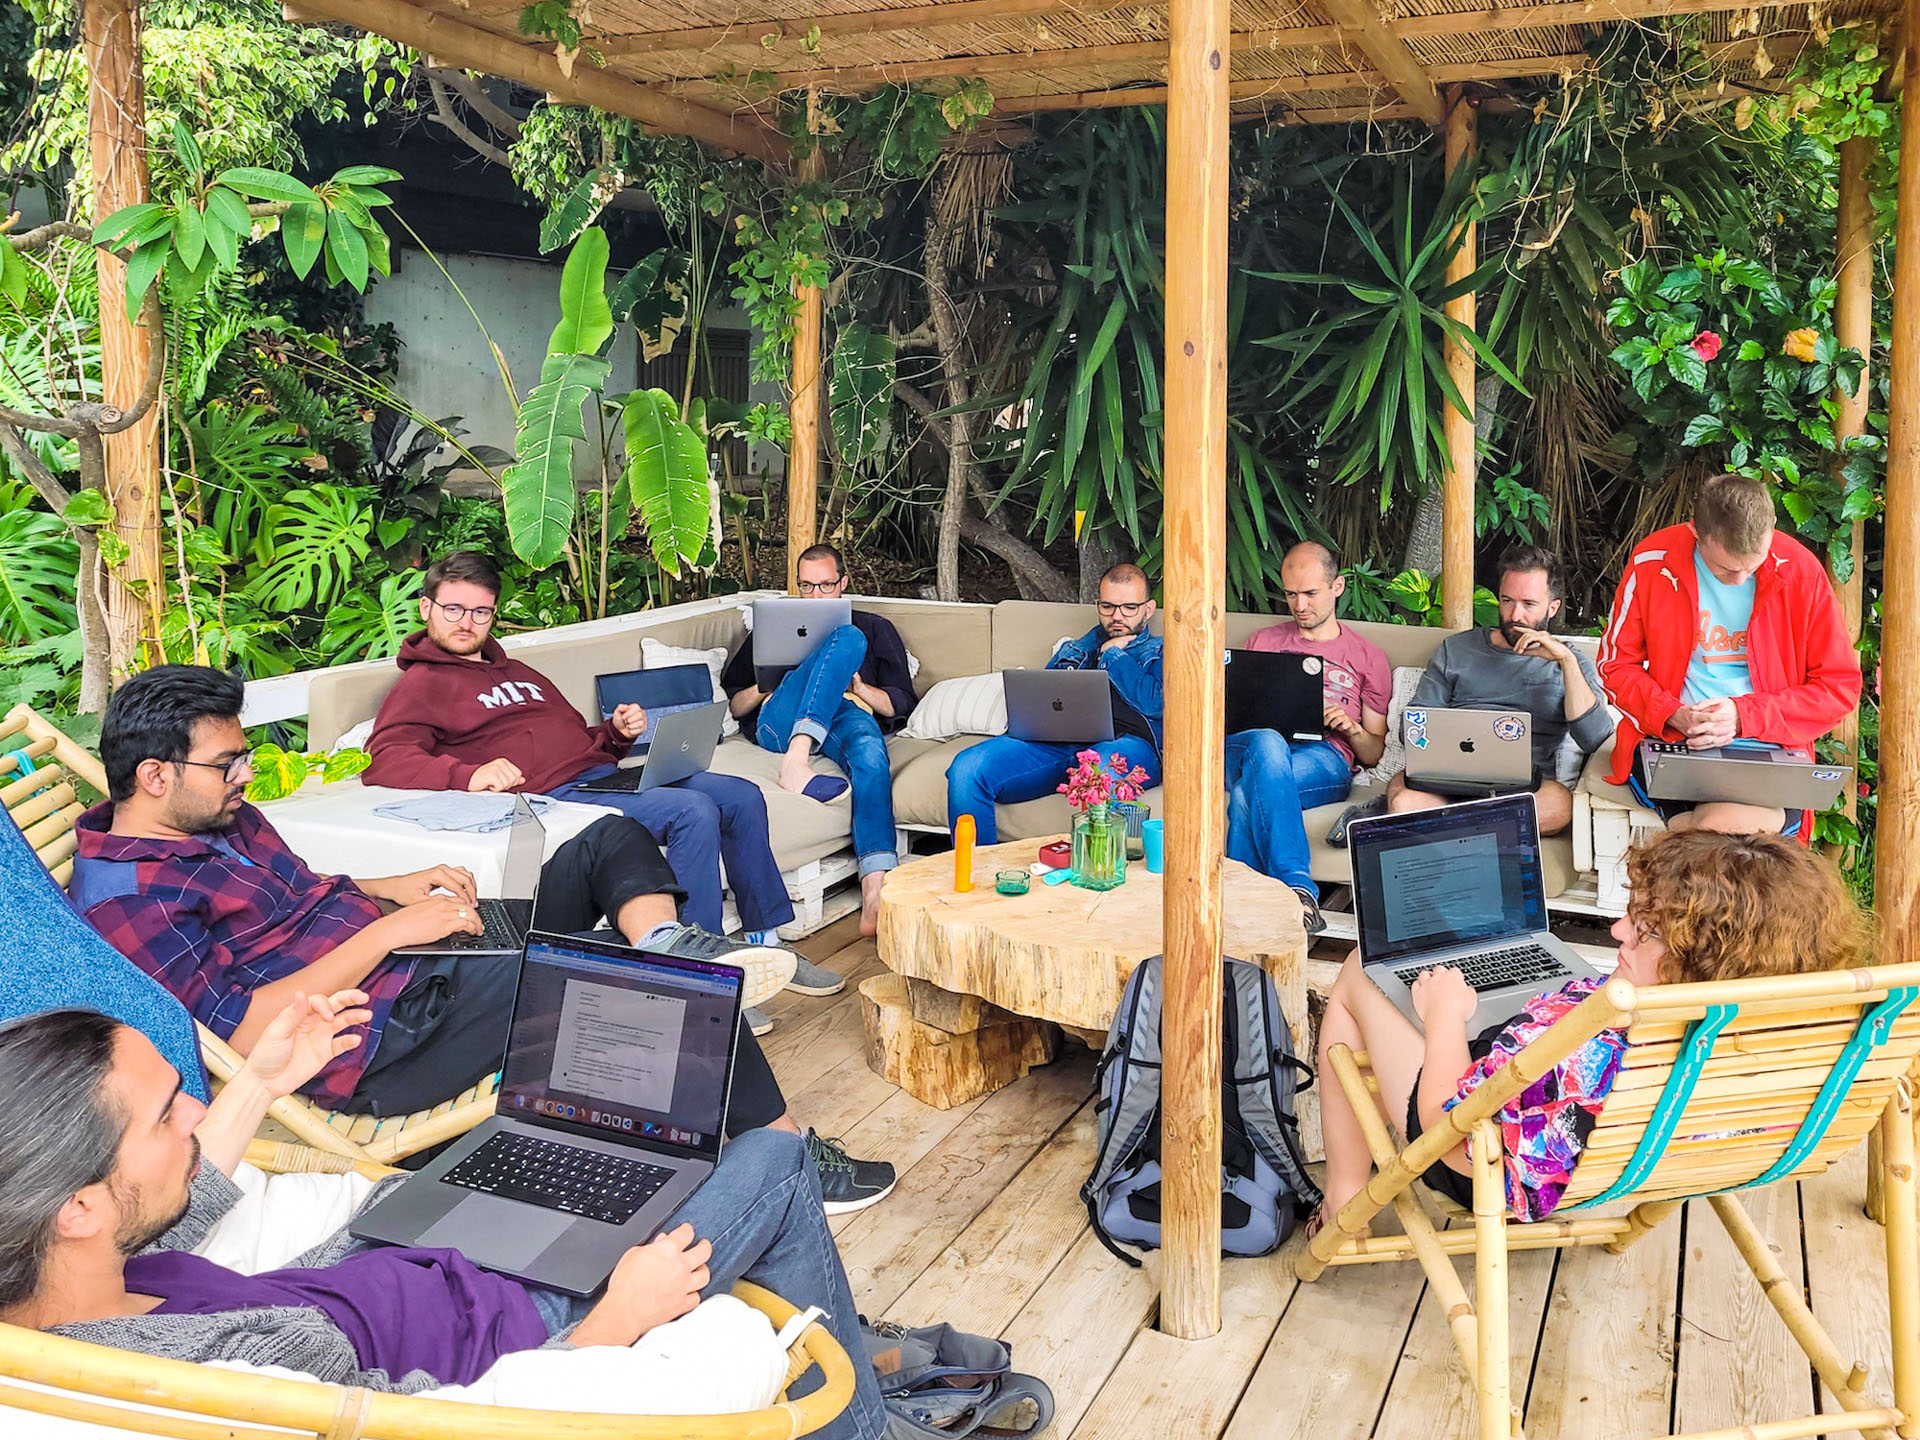 An impromptu focus group gathered next to the pool with laptops to discuss cross-team marketing strategies.